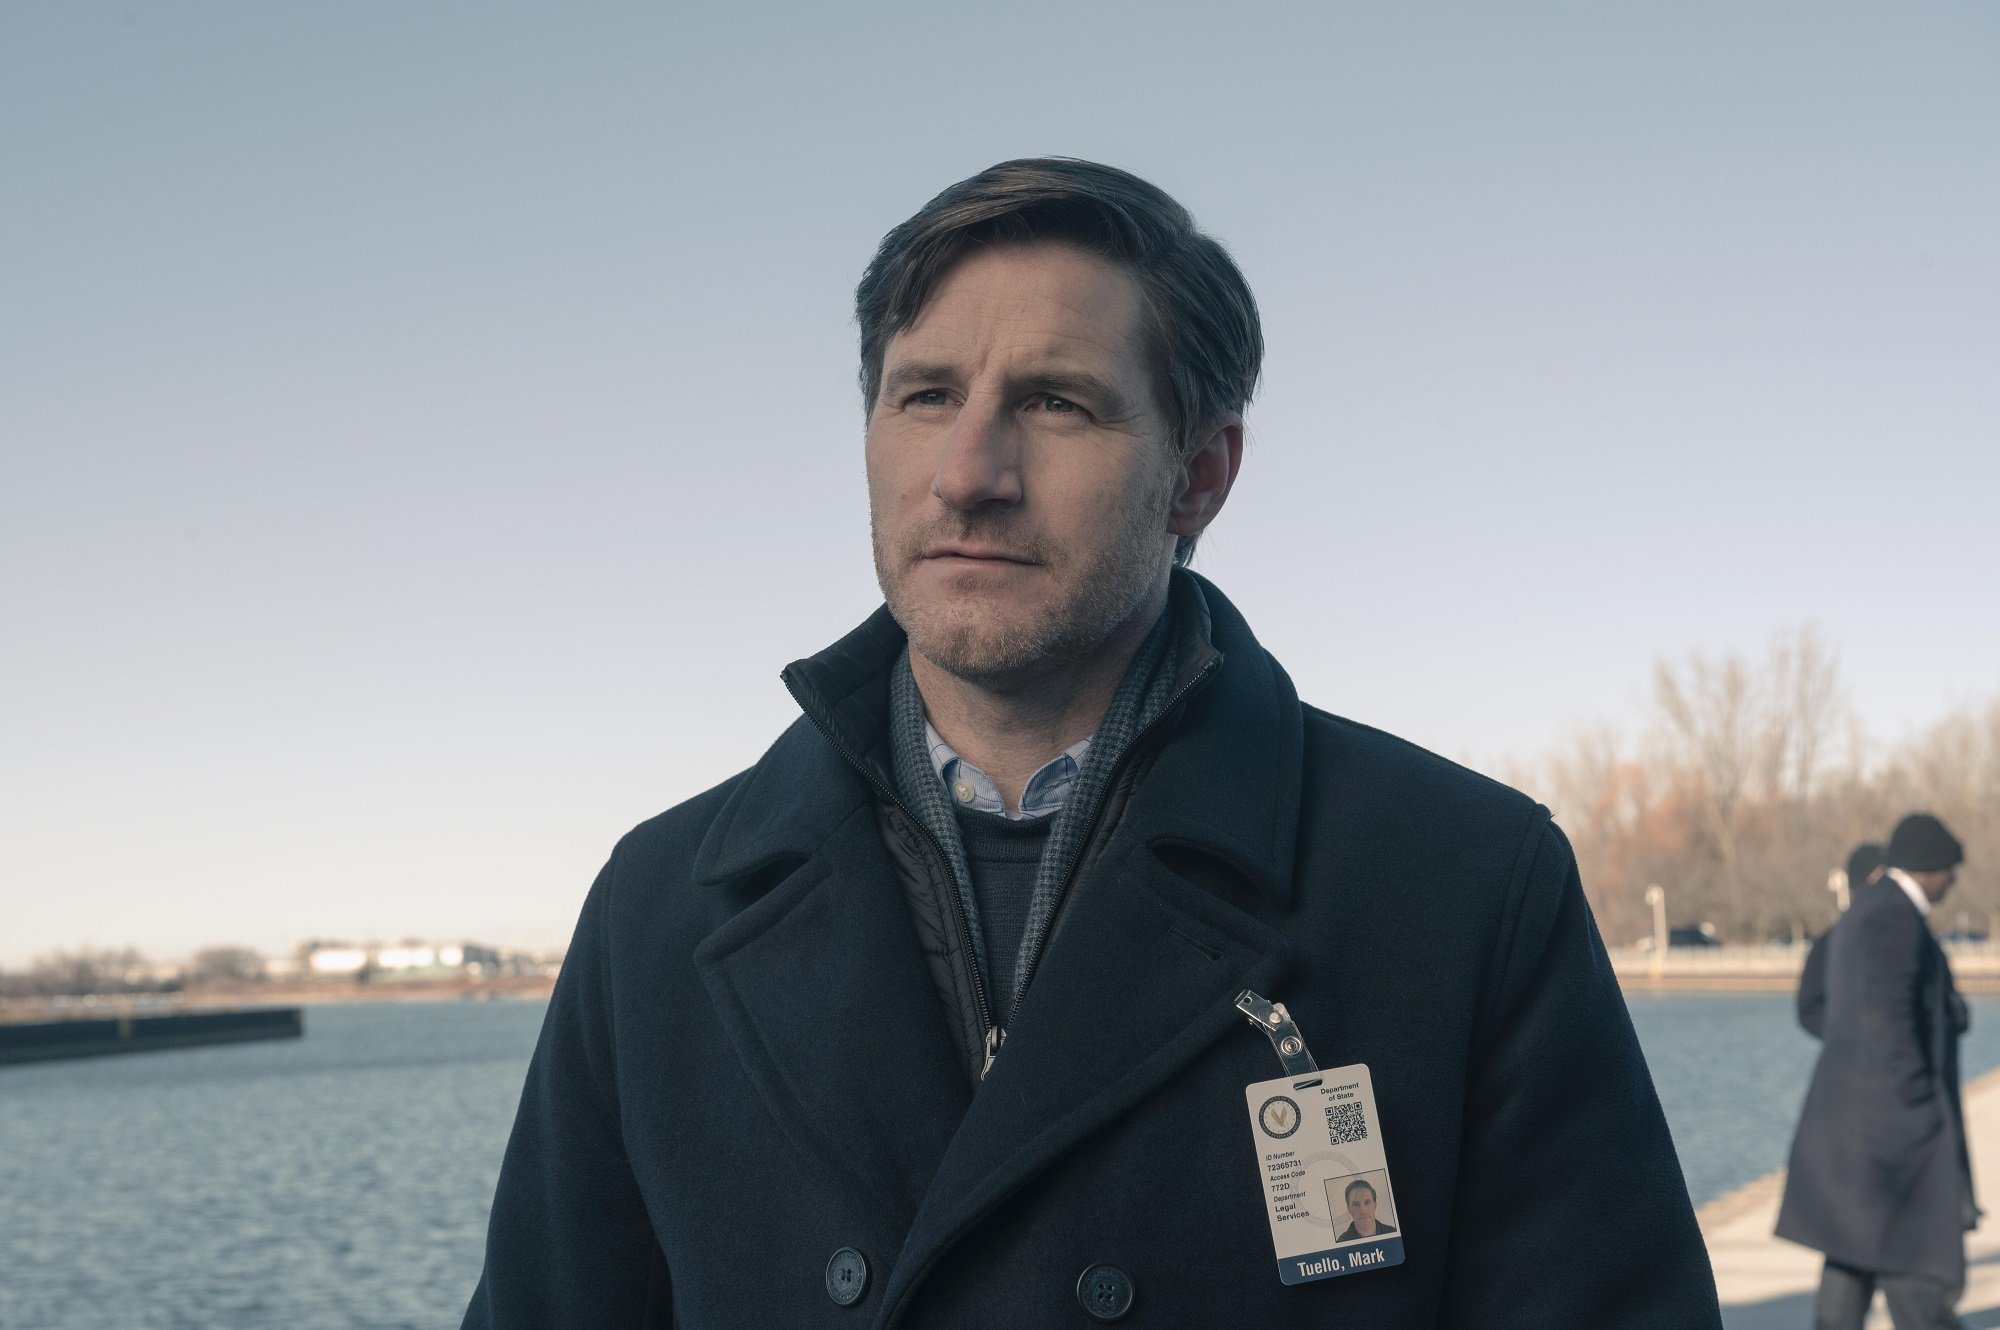 Mark Tuello (Sam Jaeger) stands on a dock in front of water in 'The Handmaid's Tale'